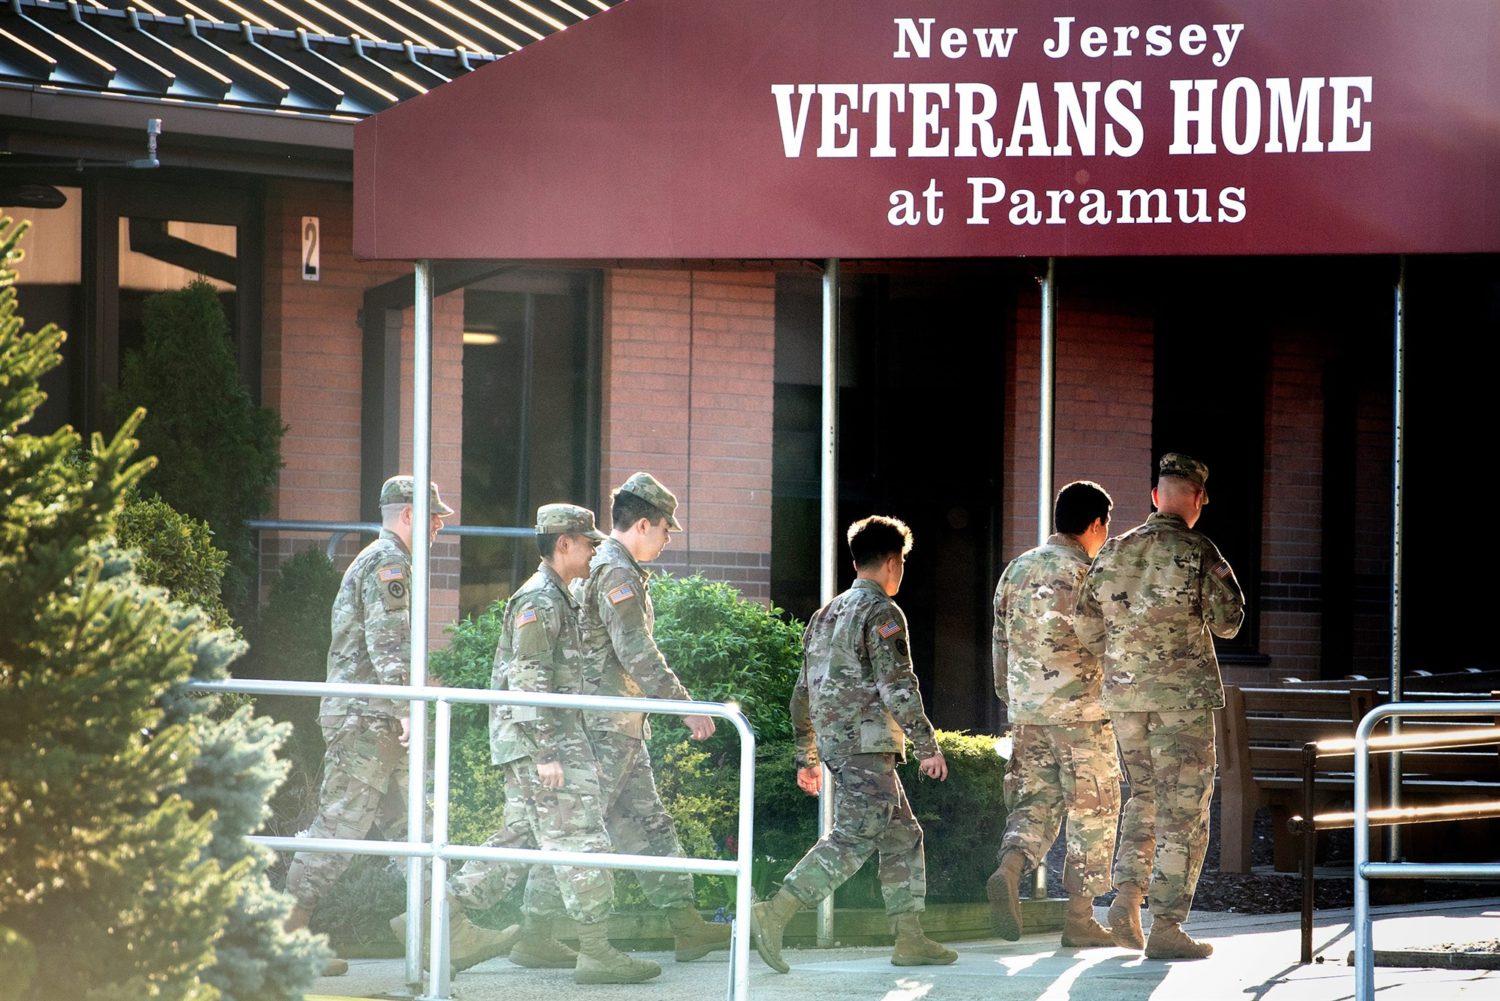 The New Jersey Veterans Home in Paramus on Wednesday, April 8, 2020